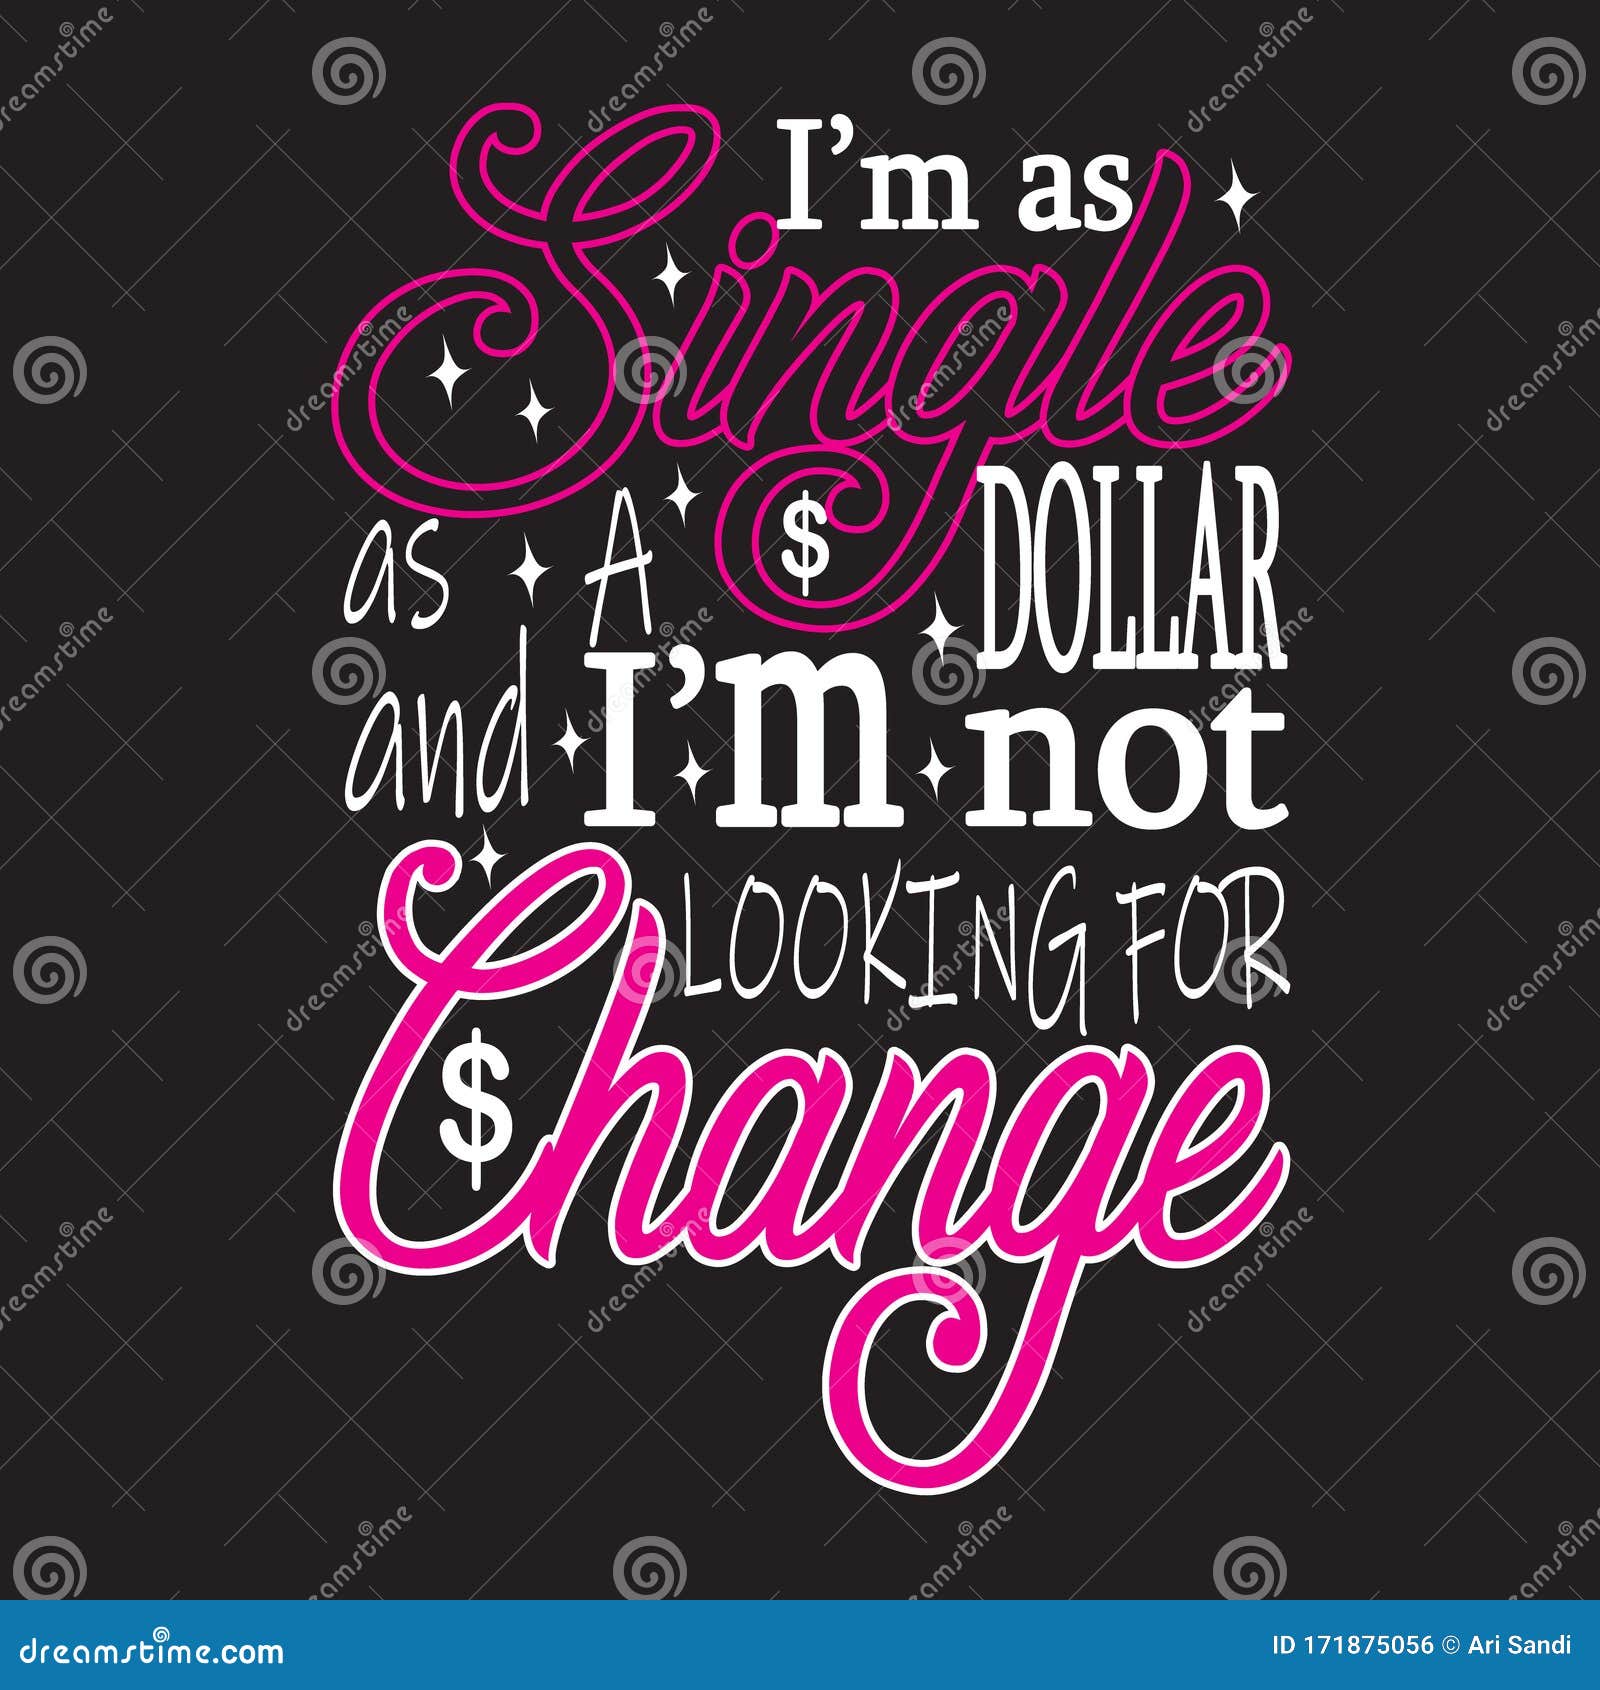 single quotes and slogan good for t-shirt. i m as single as a dollar and i m not looking for change